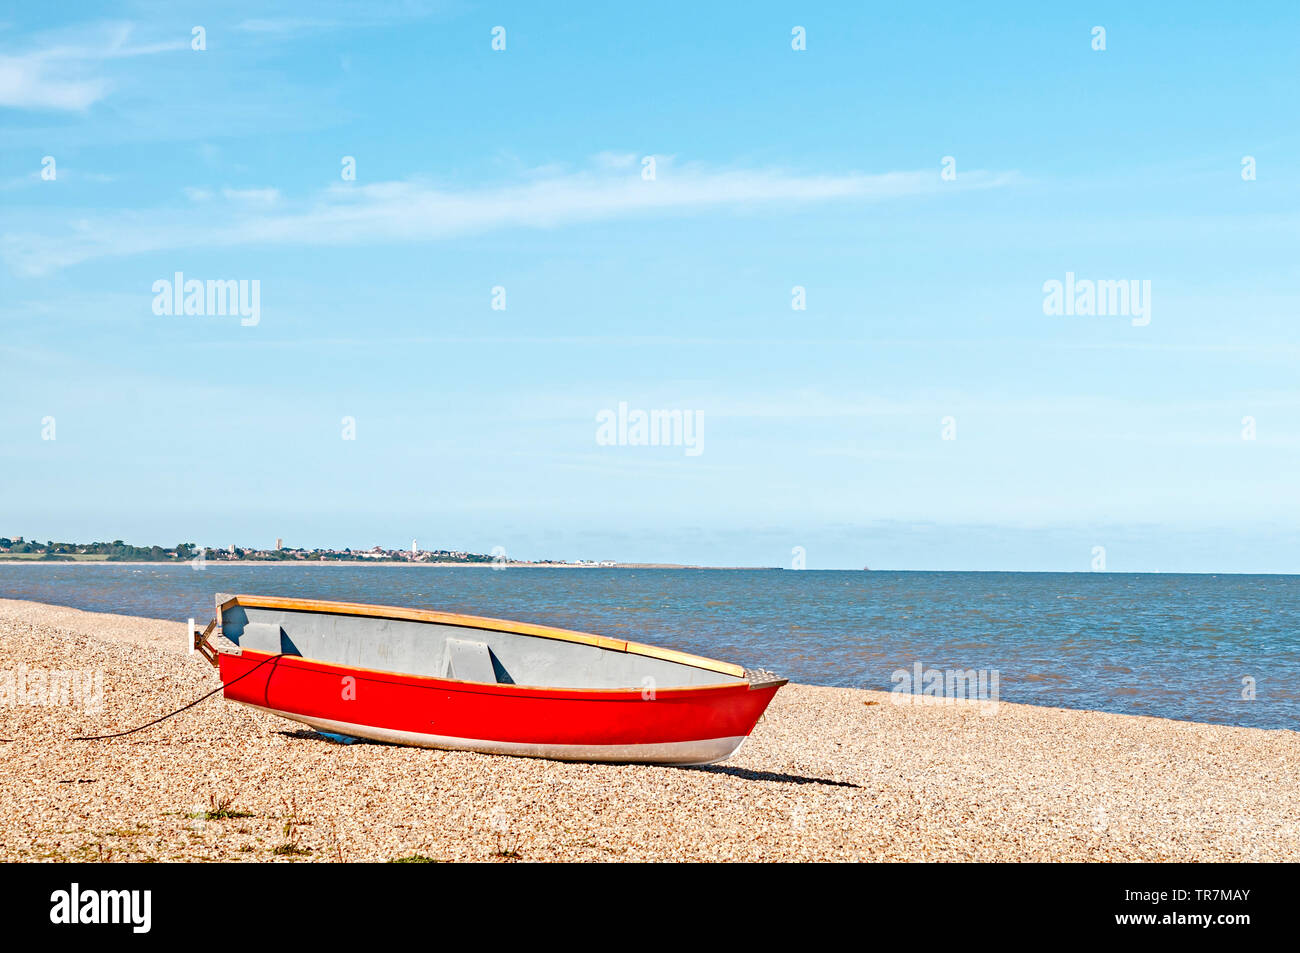 Dunwich (Suffolk, England): A boat on shore; ein altes Ruderboot am Strand Stock Photo